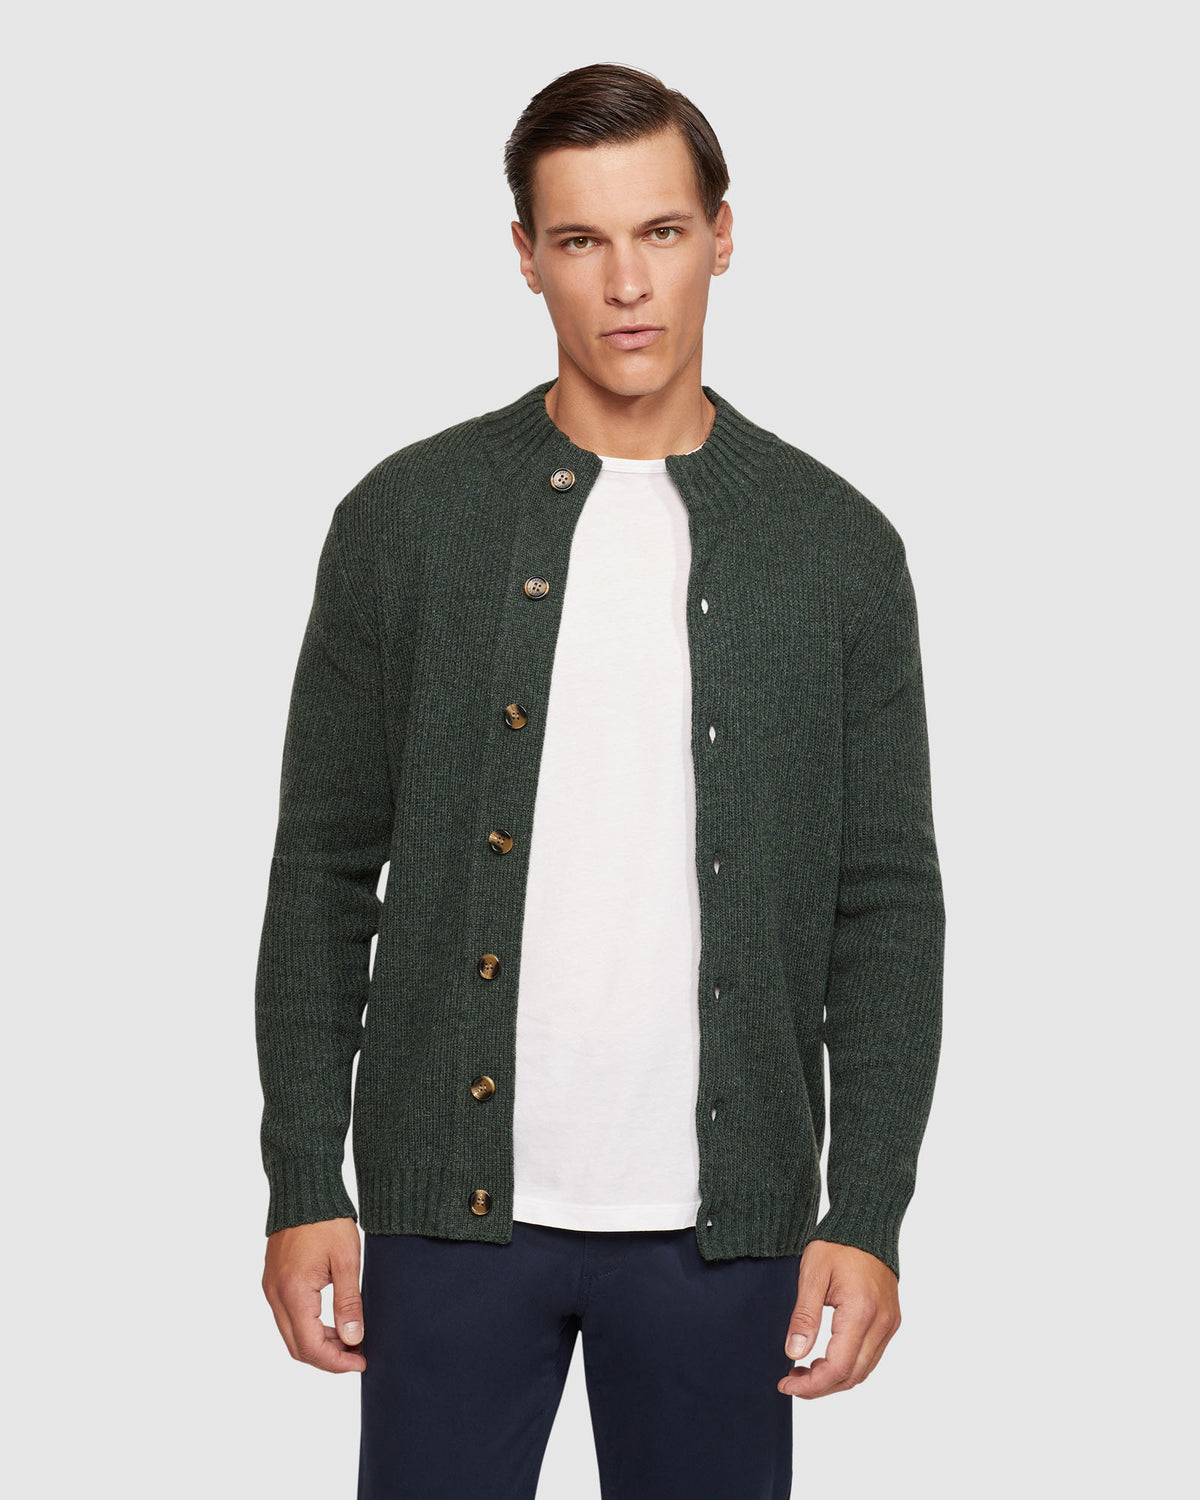 LENNY BUTTON UP CARDIGAN MENS KNITWEAR